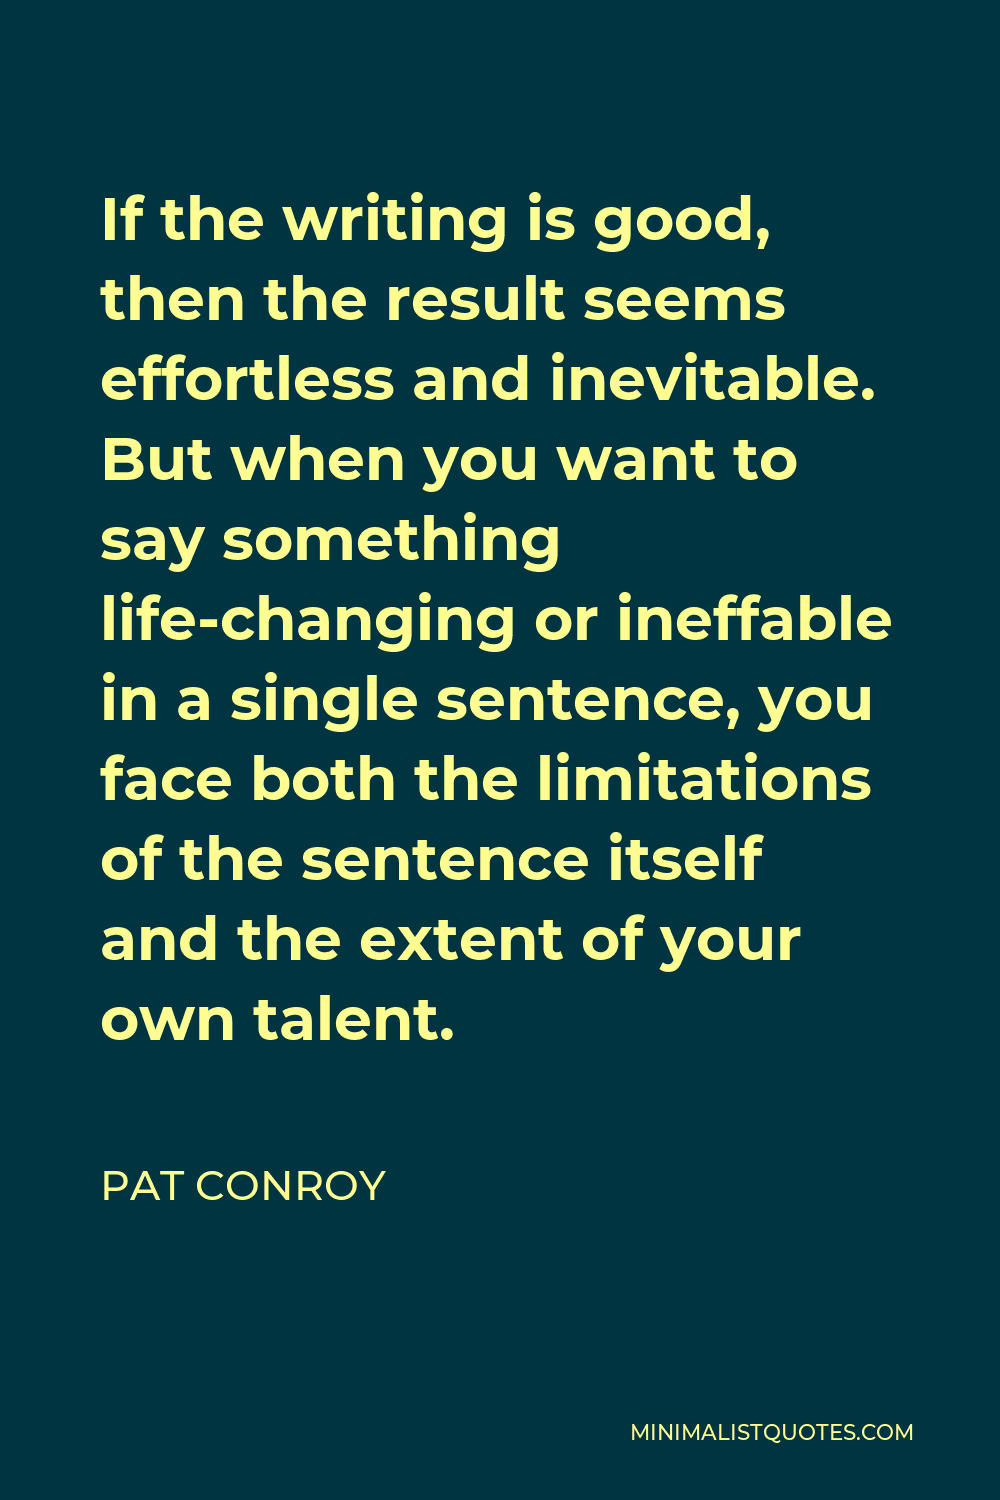 Pat Conroy Quote - If the writing is good, then the result seems effortless and inevitable. But when you want to say something life-changing or ineffable in a single sentence, you face both the limitations of the sentence itself and the extent of your own talent.